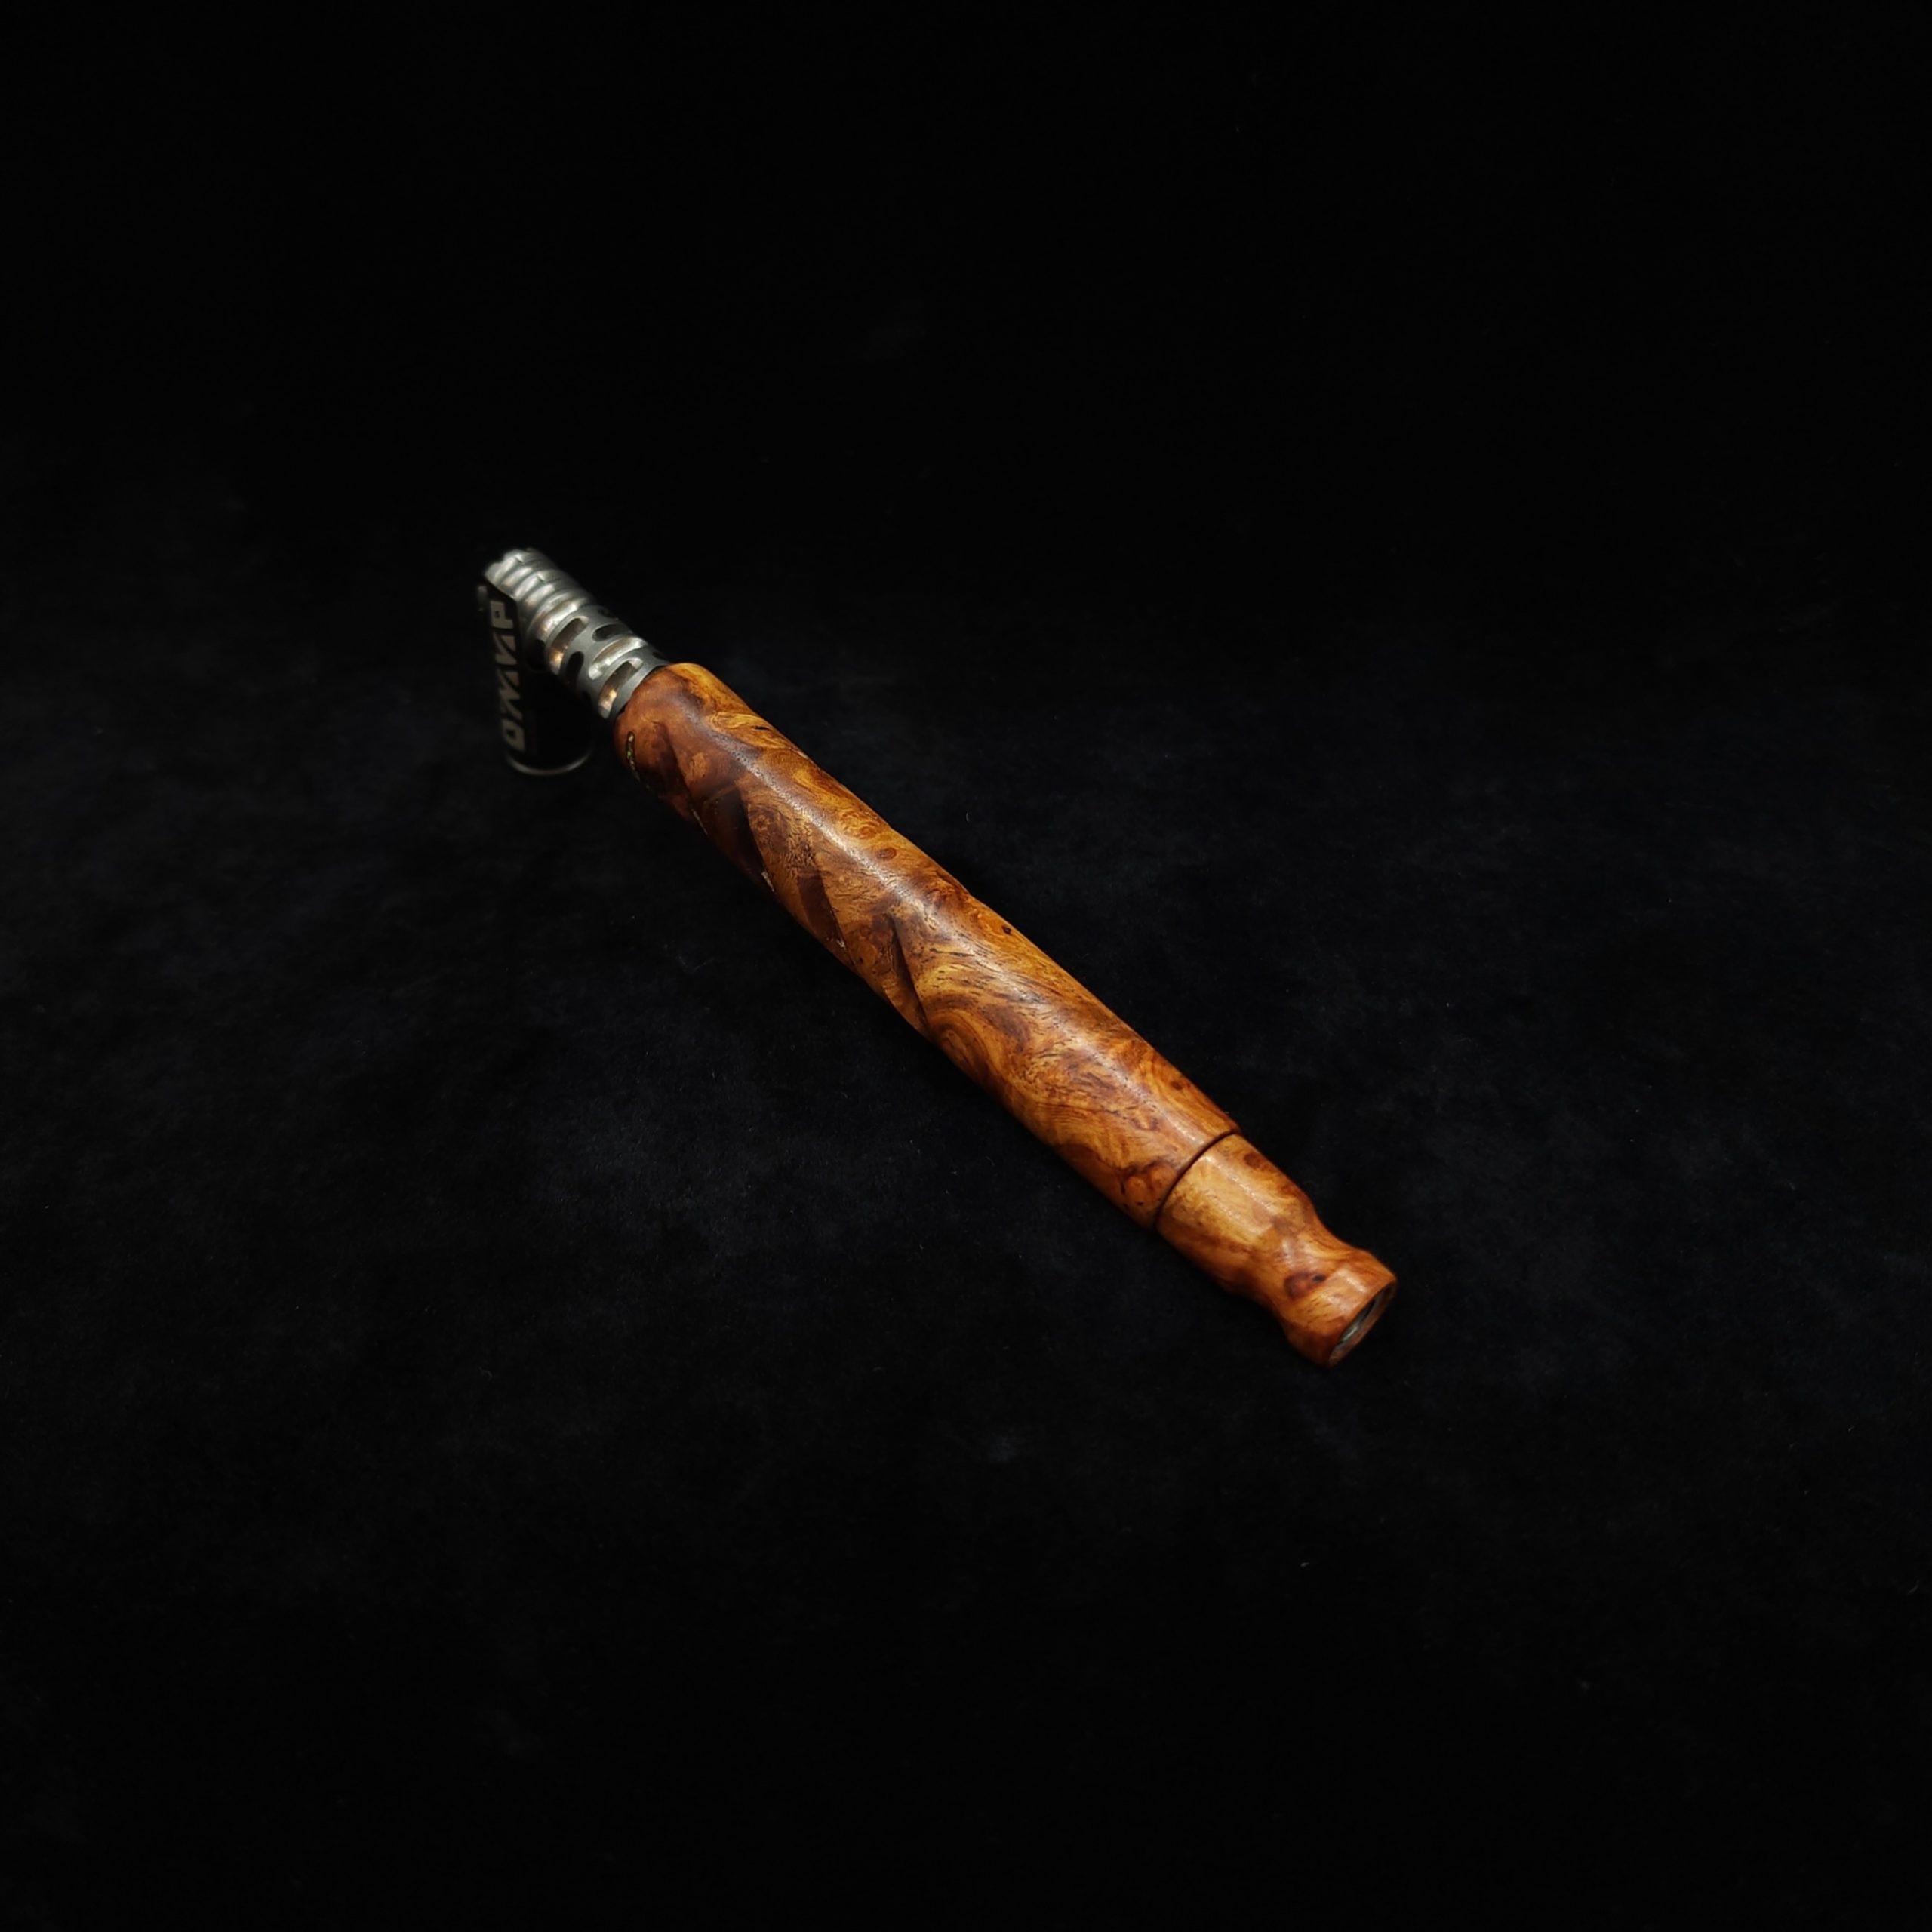 This image portrays Trigonous Hybrid-Eclipse XL Dynavap Stem w/Olive Green Opal Inlays+Mouthpiece by Dovetail Woodwork.